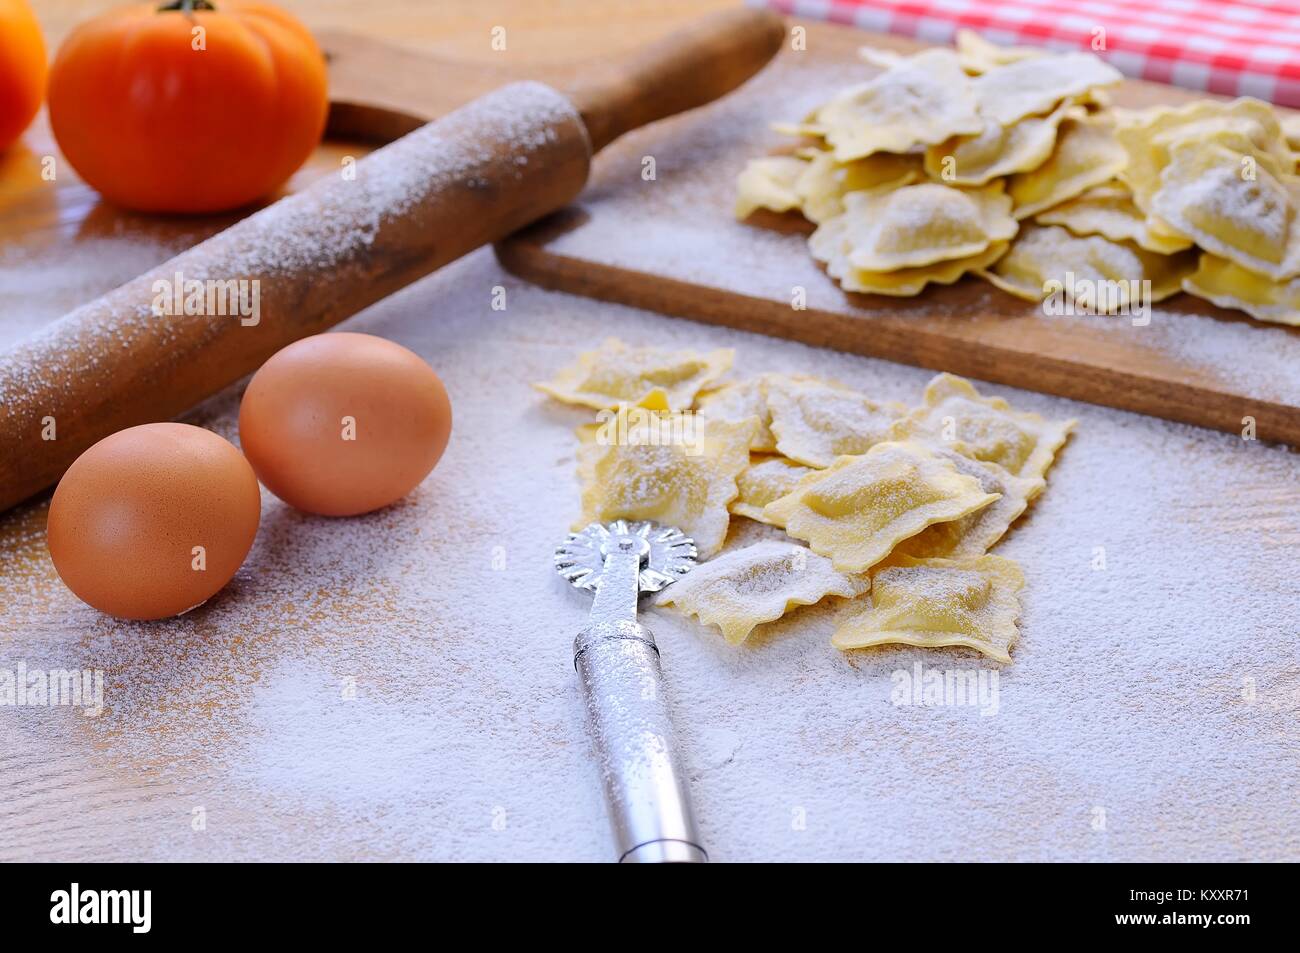 Uncooked vareniki on table covered with flour.Eggs, rolling pin. Stock Photo